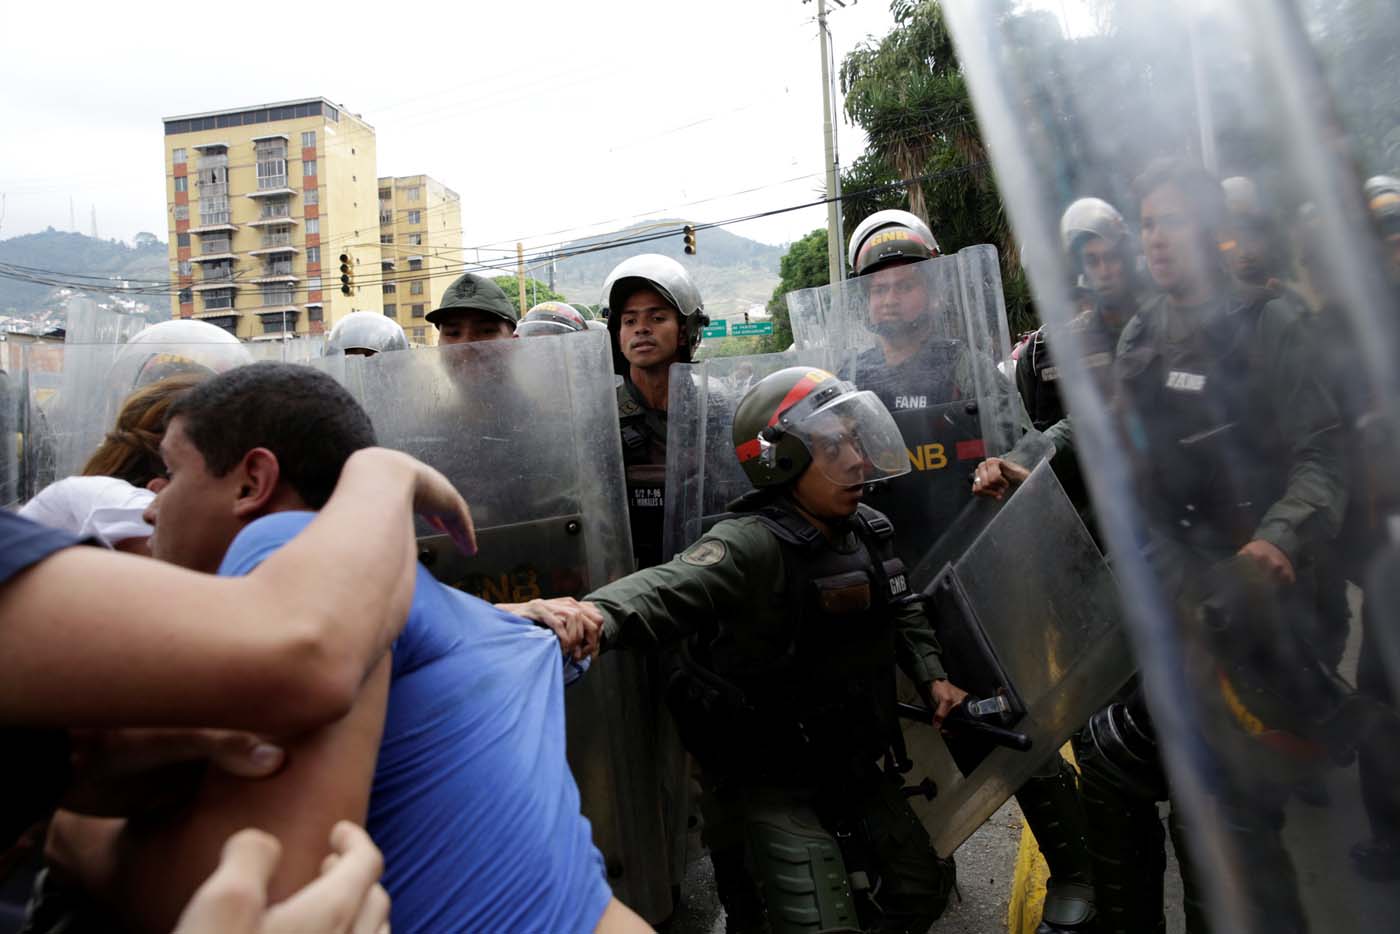 Opposition supporters clash with Venezuela's National Guards during a protest against Venezuelan President Nicolas Maduro's government outside the Supreme Court of Justice (TSJ) in Caracas, Venezuela March 31, 2017. REUTERS/Marco Bello